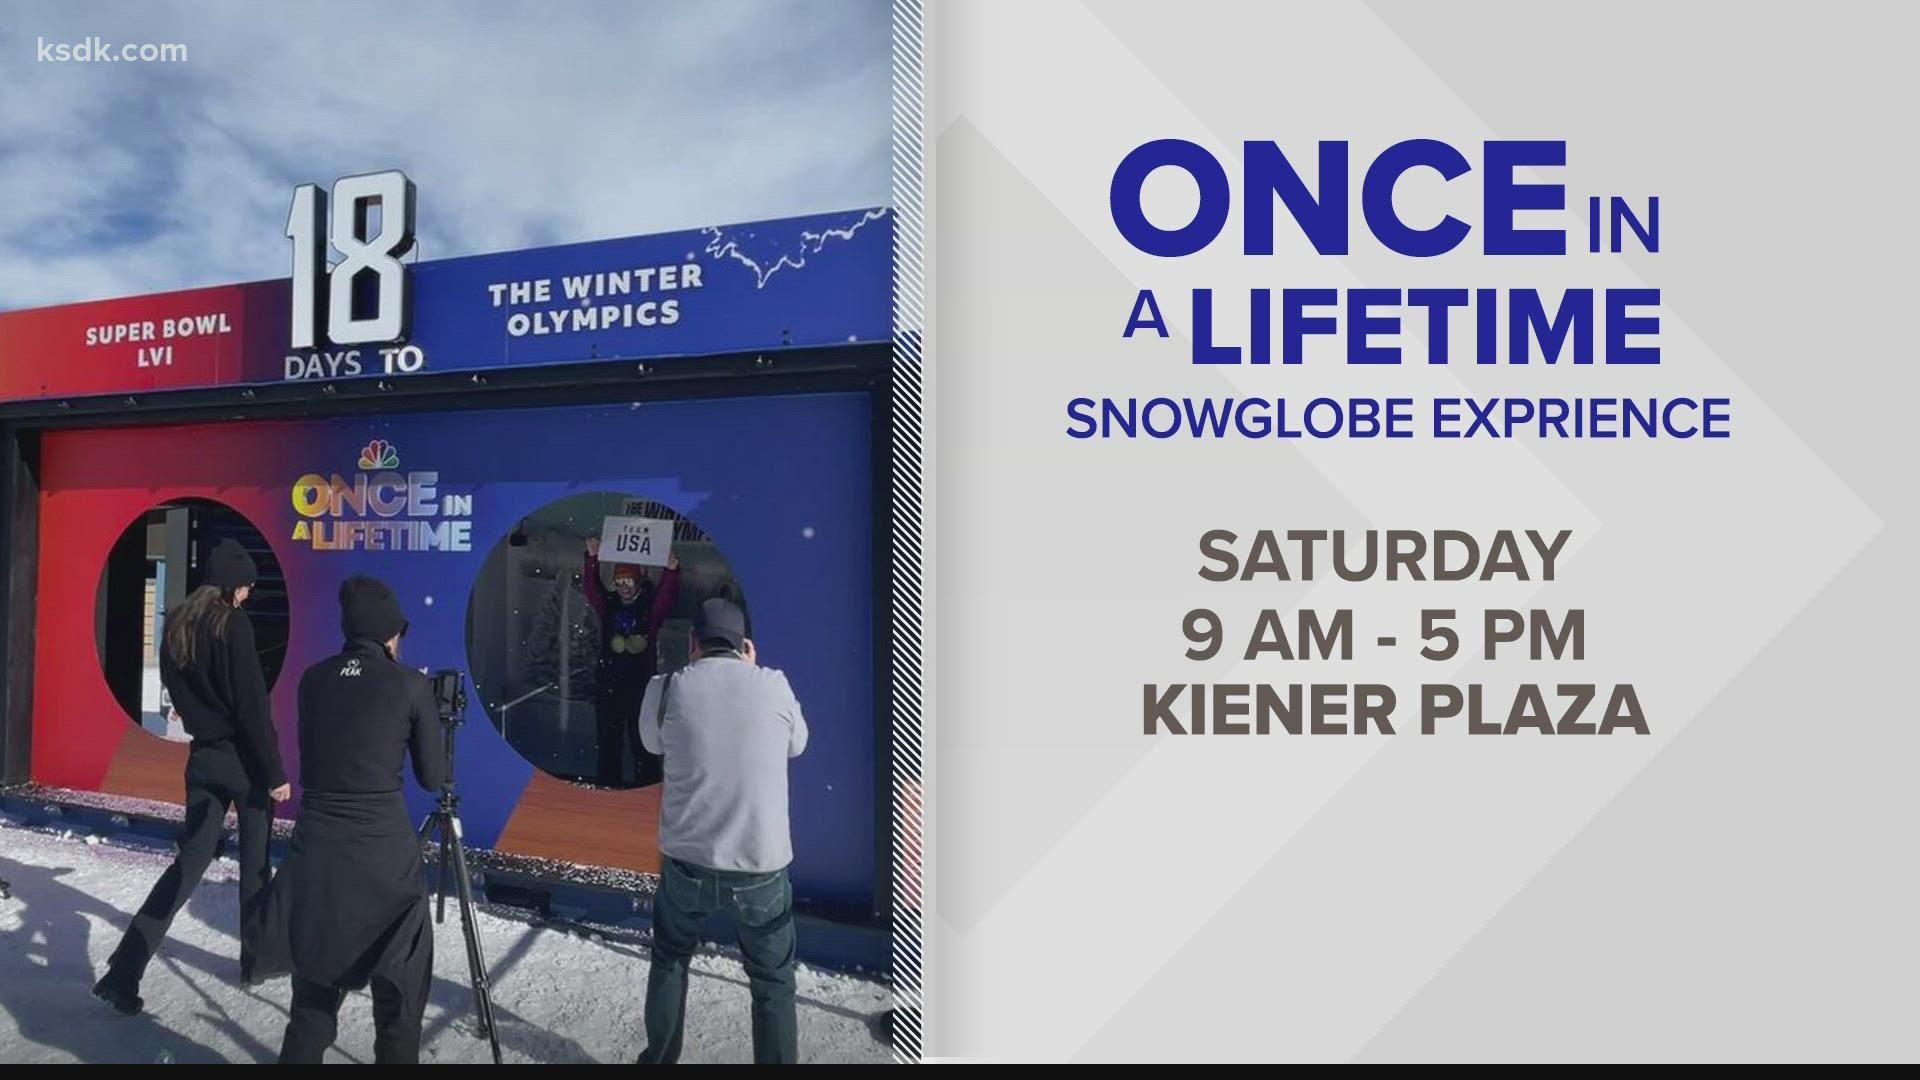 Grab your friends and your smile and head to Kiener Plaza for this 'once in a lifetime' event!